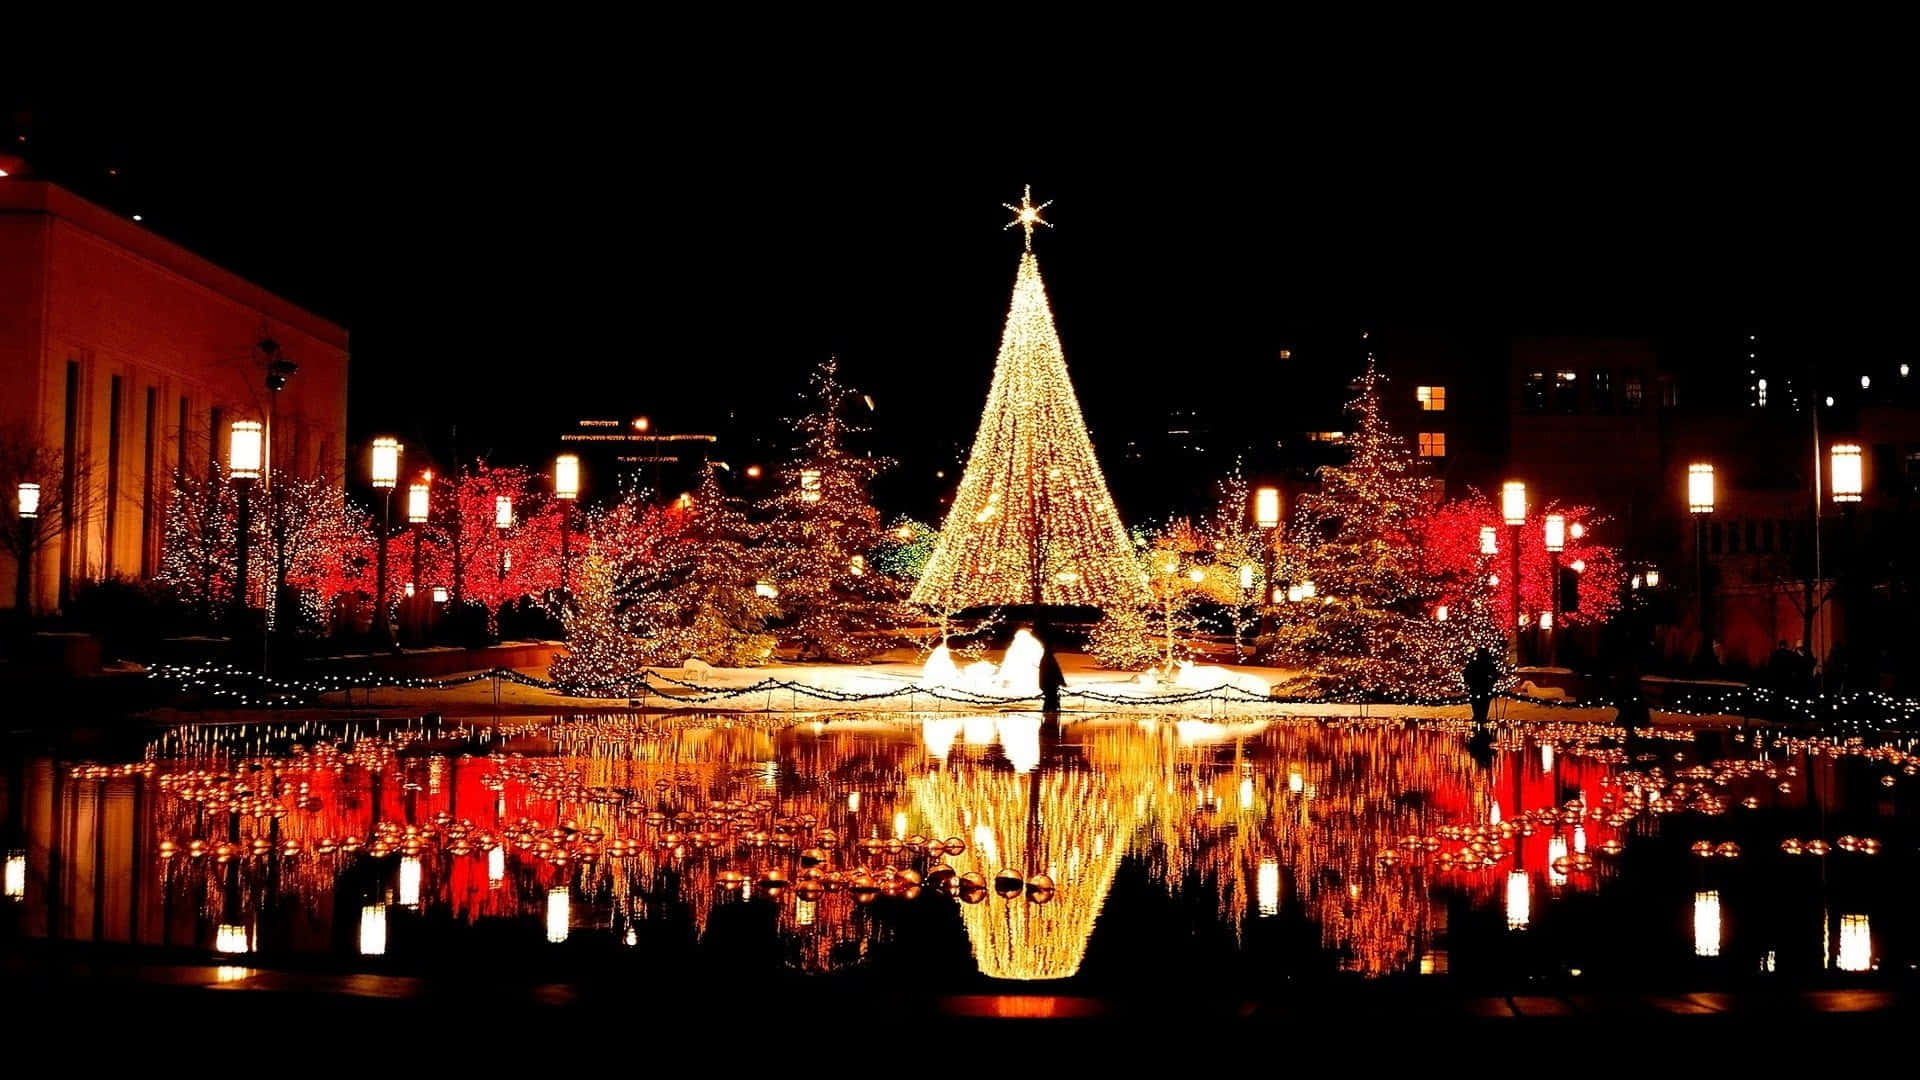 A Christmas Tree Is Lit Up In A Pond